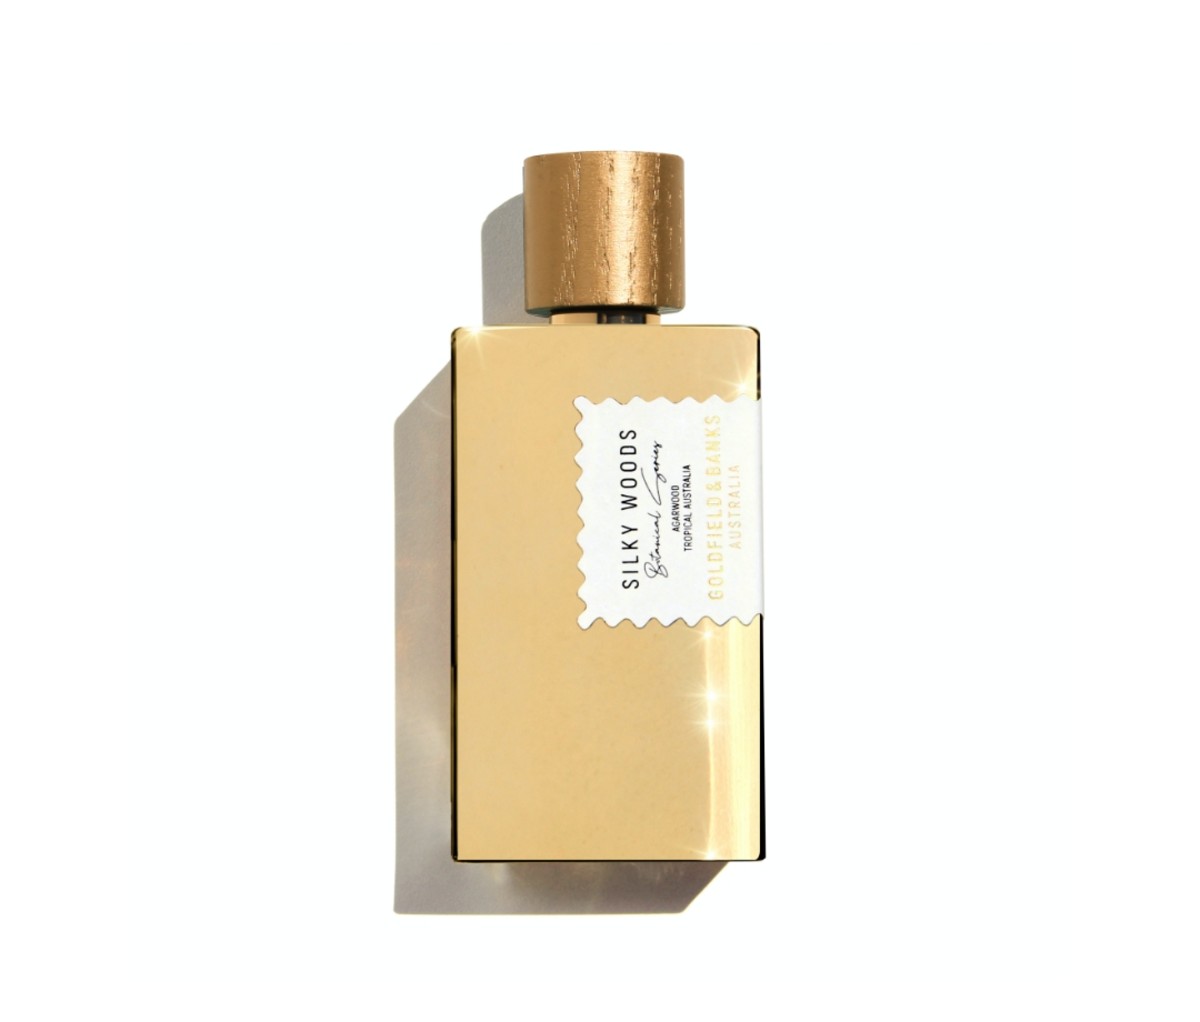 Silky Woods by Goldfield & Banks fall colognes